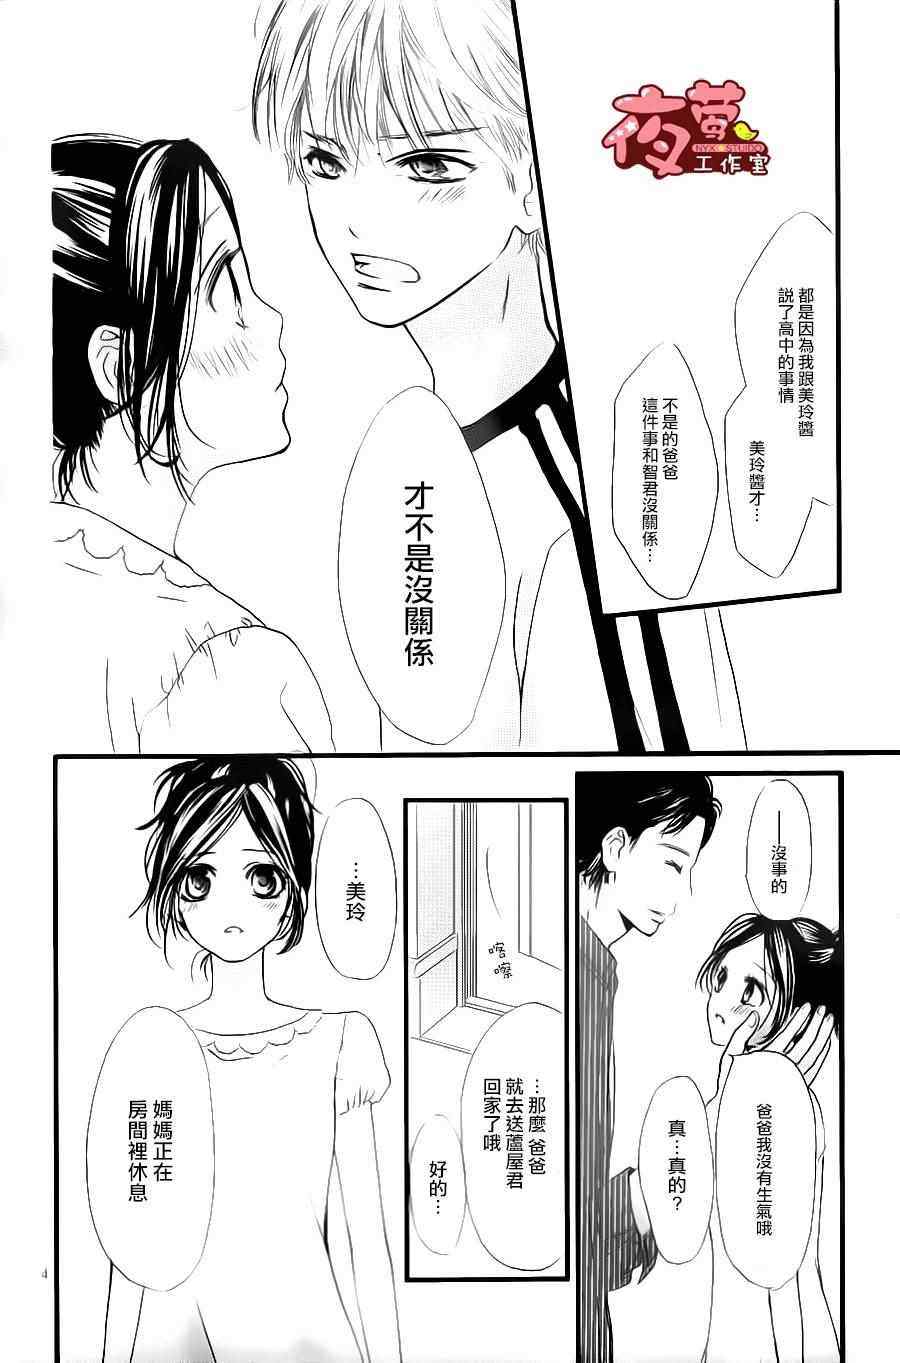 I love you baby - 第27话 - 4